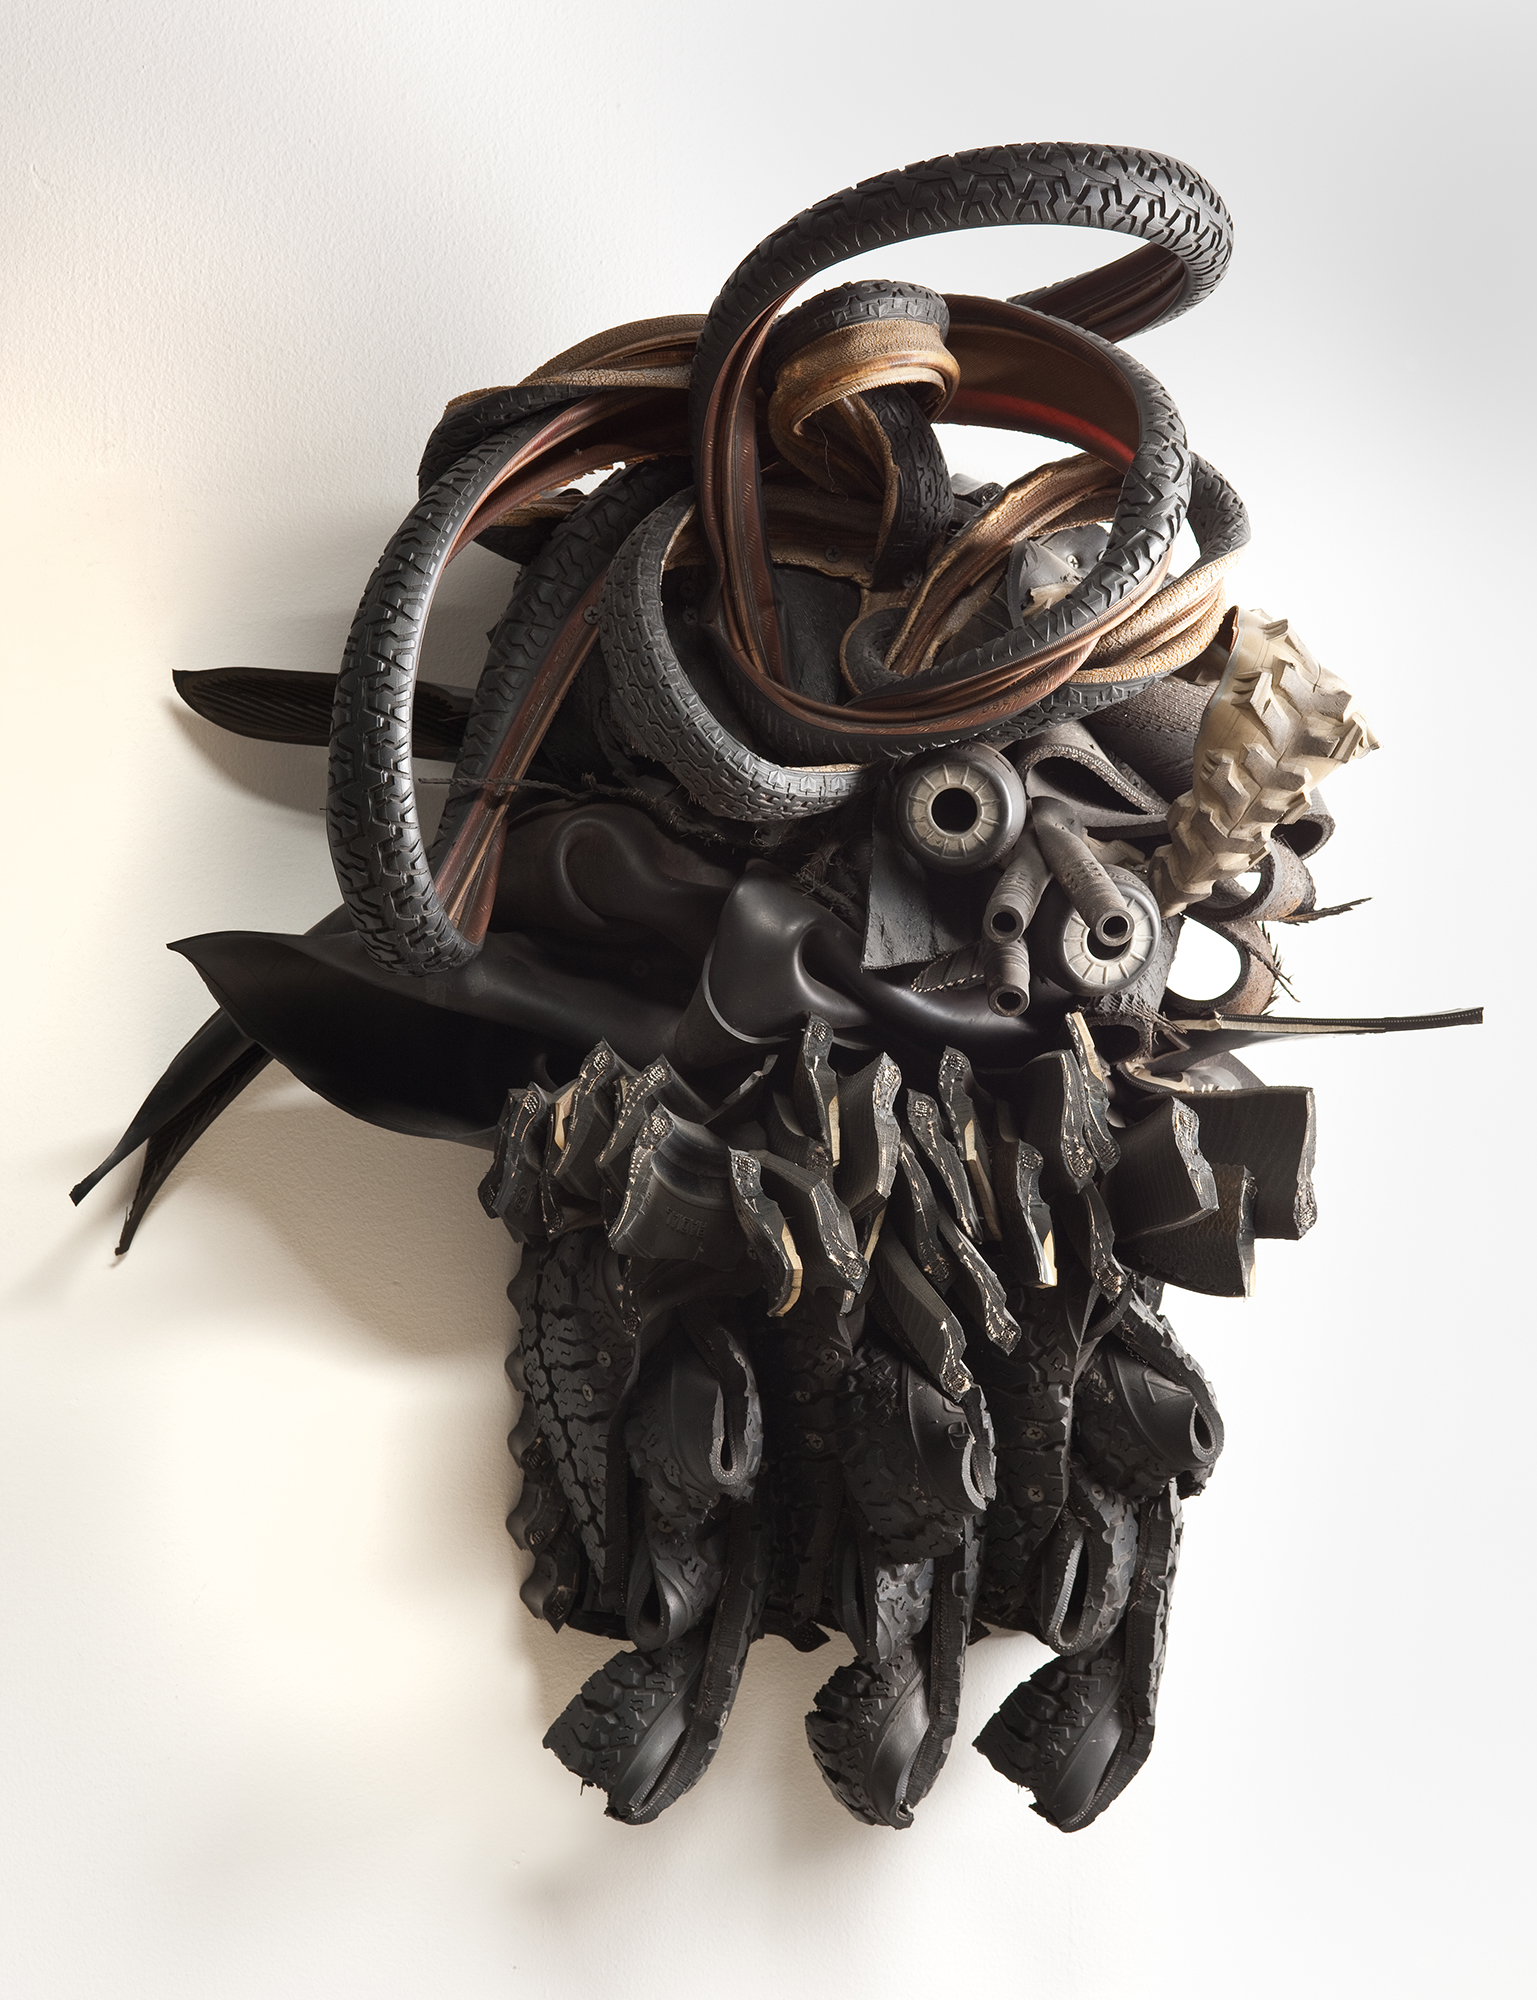 A hanging sculpture made of different sizes and shapes of tires and other rubber objects